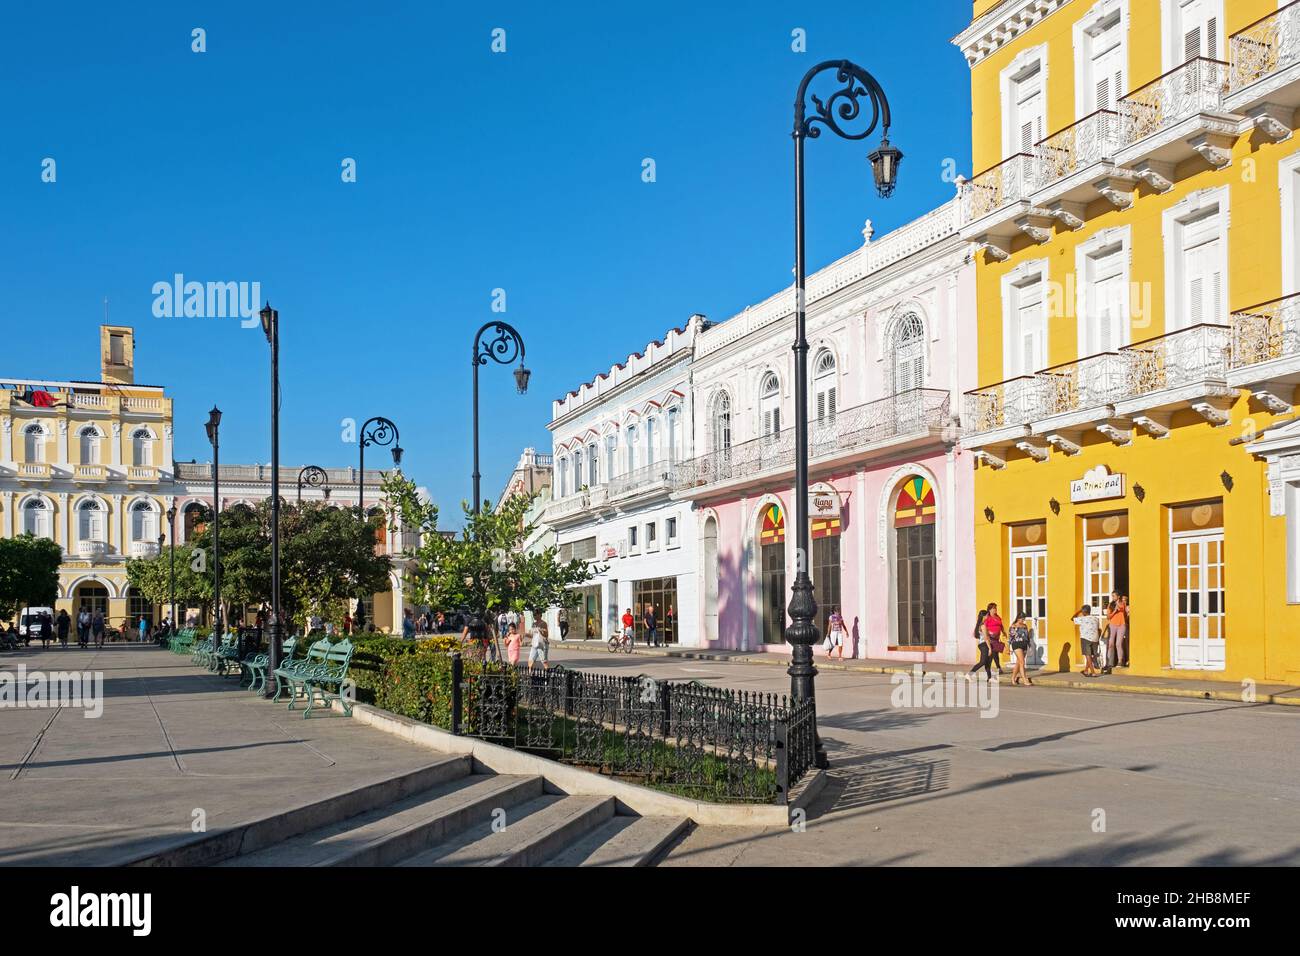 Parque Serafin Sánchez and buildings in Spanish colonial style in the city Sancti Spíritus on the island Cuba, Caribbean Stock Photo